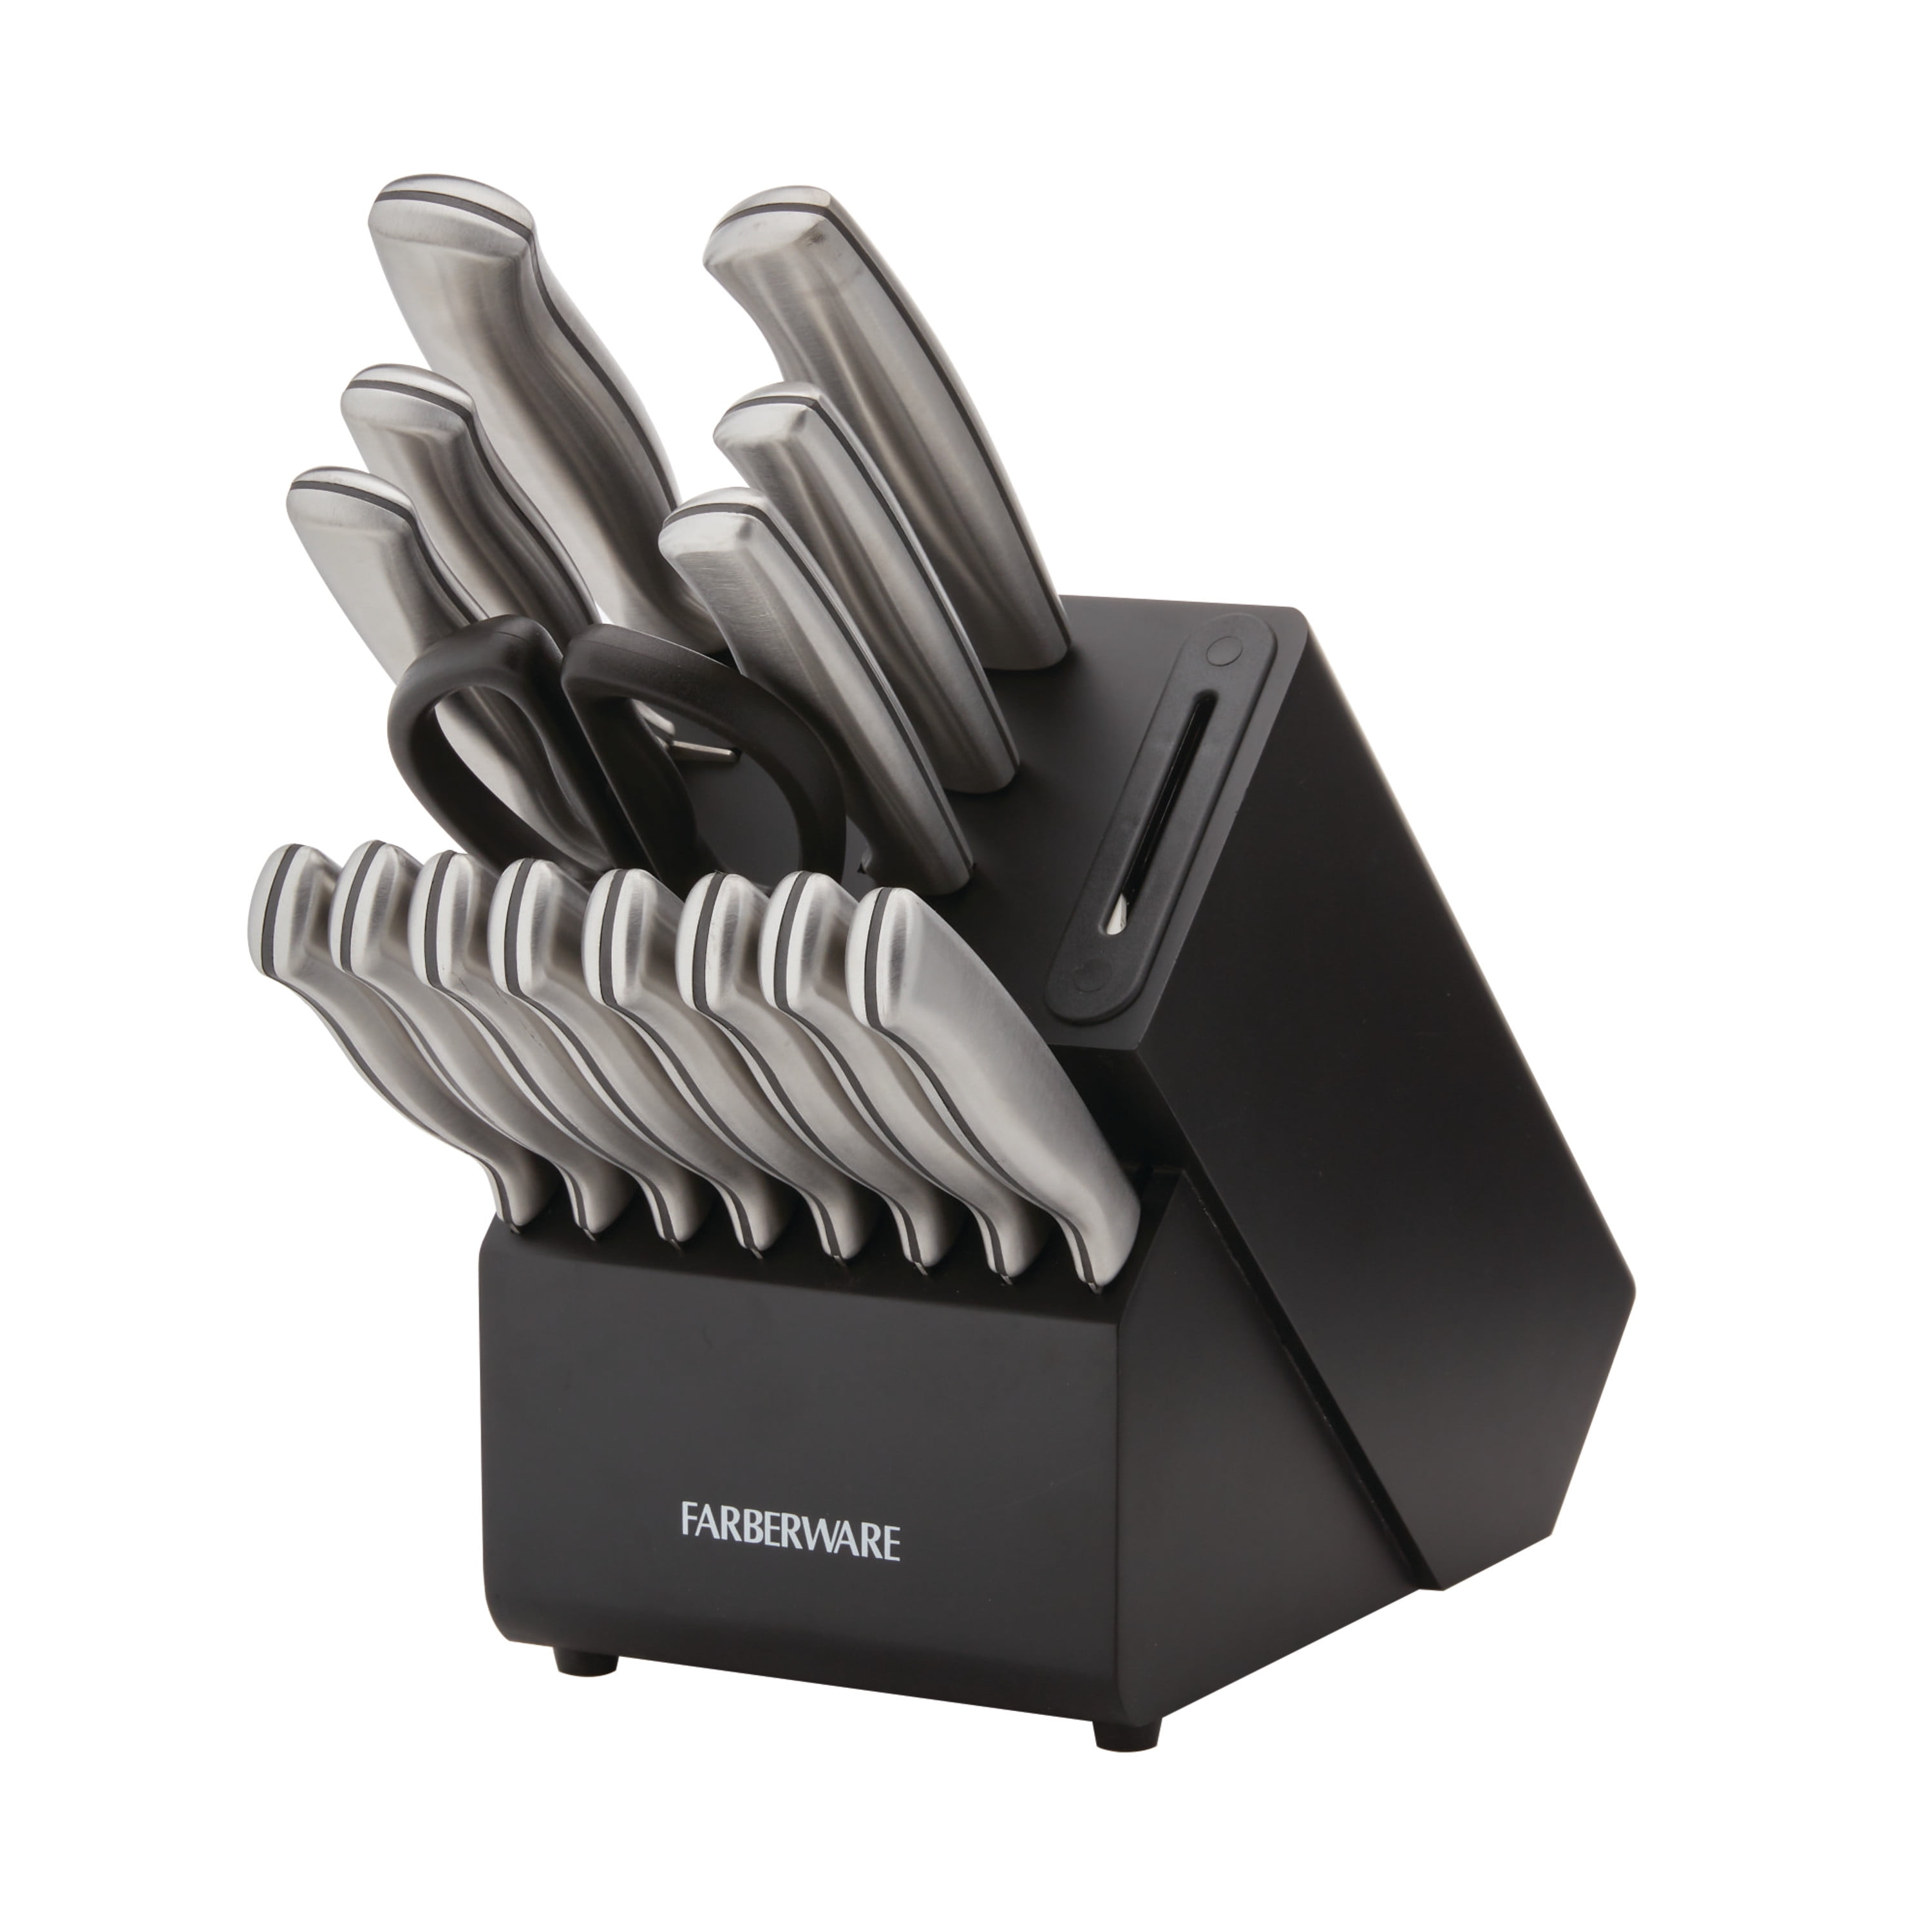 Farberware - Knife Sets - Cutlery - The Home Depot